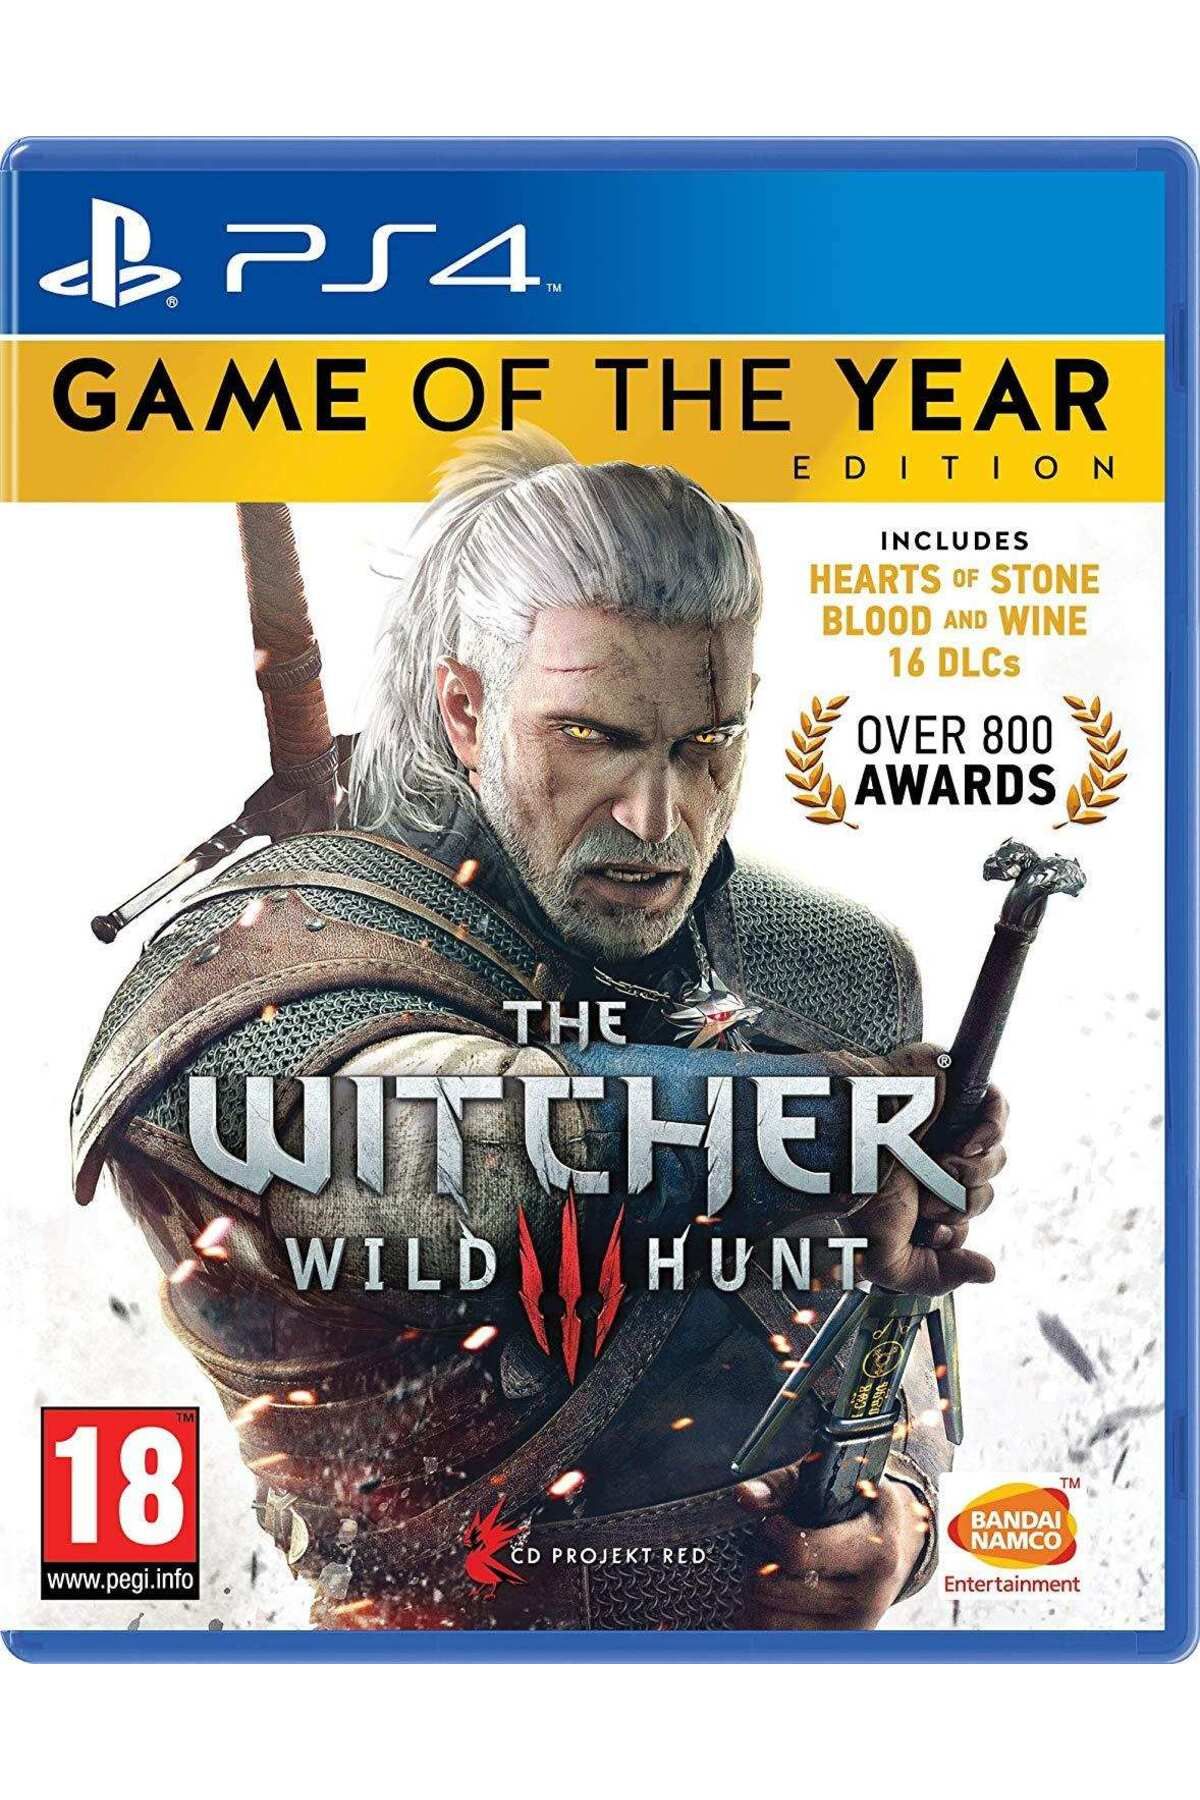 Wb Games Ps4 The Witcher 3: Wild Hunt Game Of The Year Edition